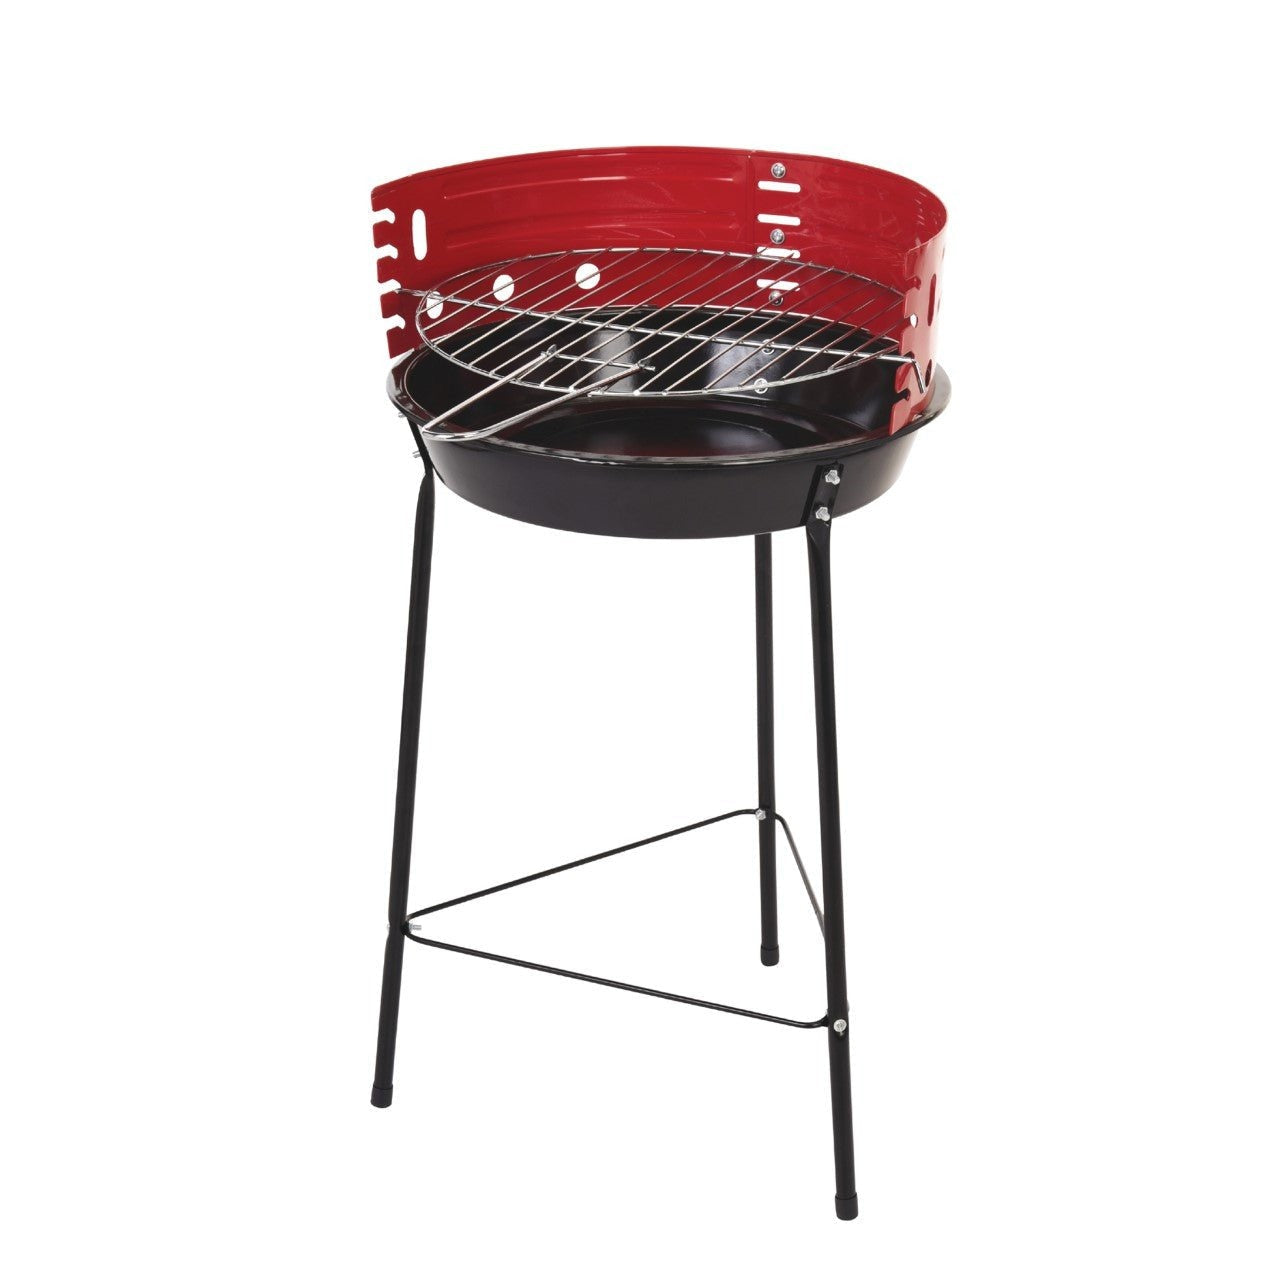 Portable Round BBQ Grill 14" with 4 Adjustable Grilling Levels 1161 (Big Parcel Rate)